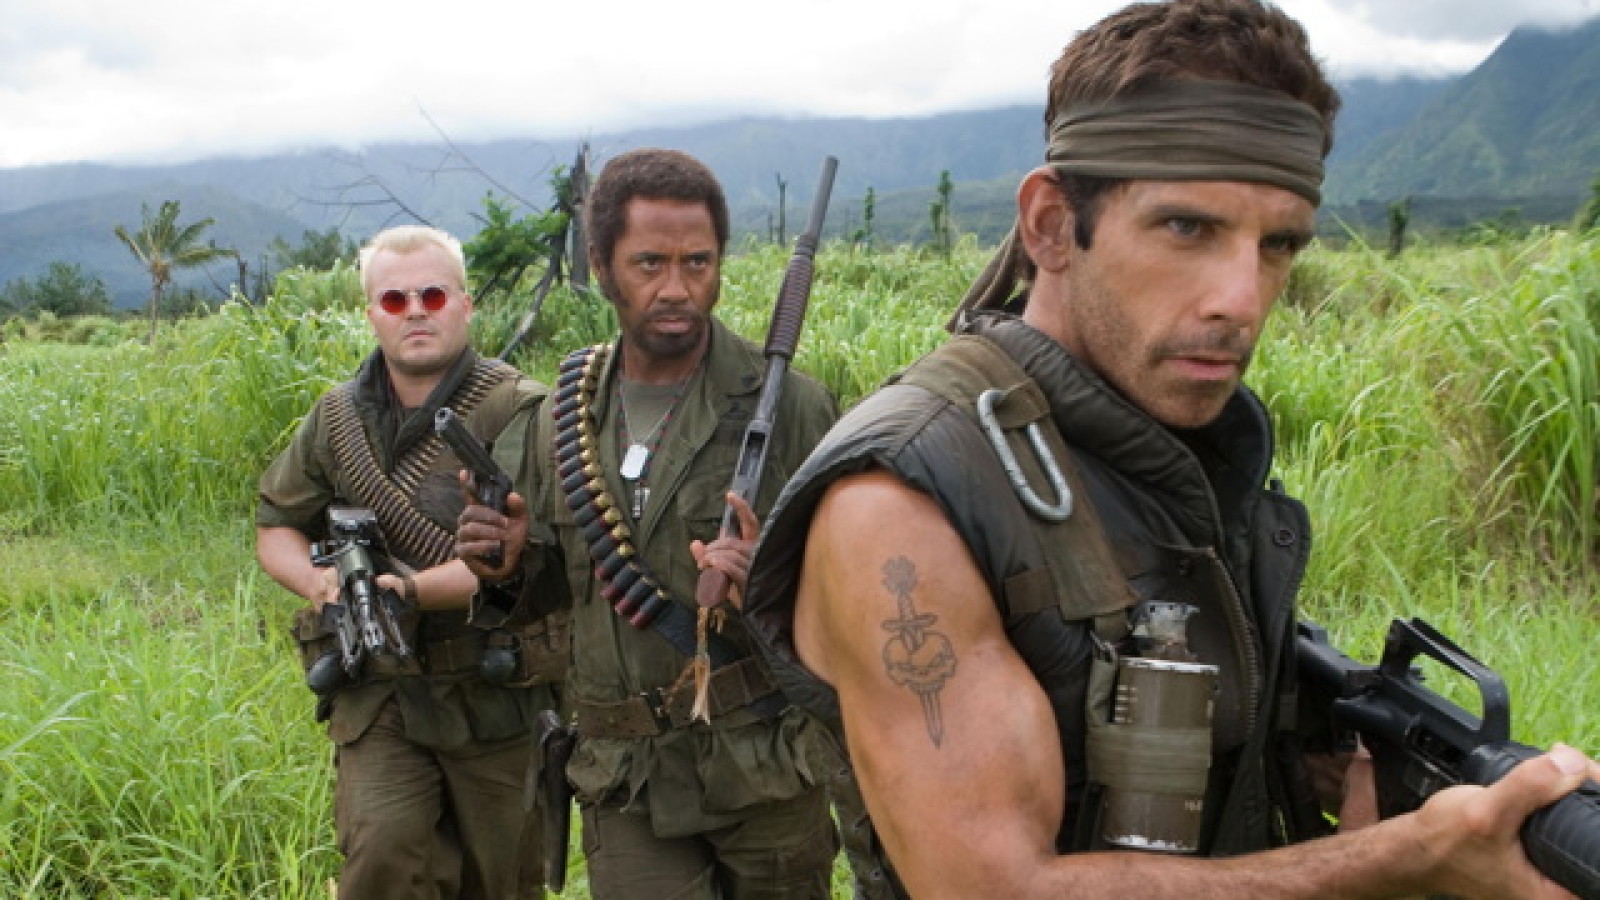 Tropic Thunder: War Satire Goes To Extremes - Solzy at the Movies